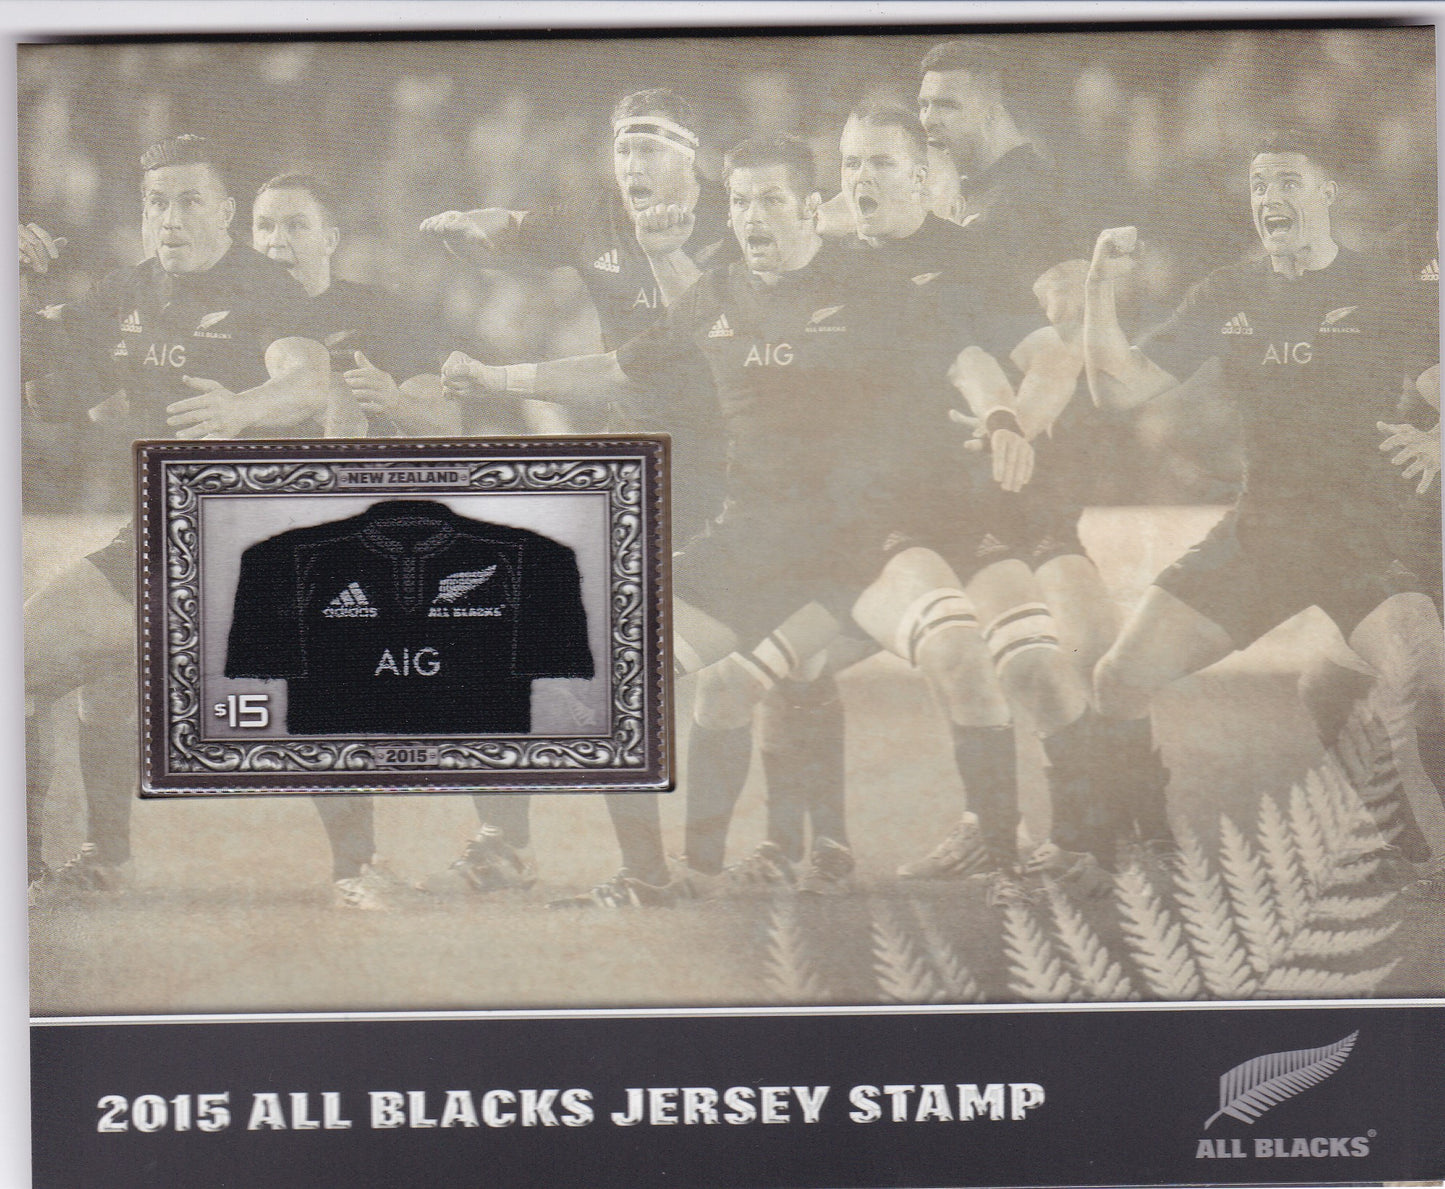 New Zealand Unique stamp made of Real T Shirt material from ADIDAS-all blacks